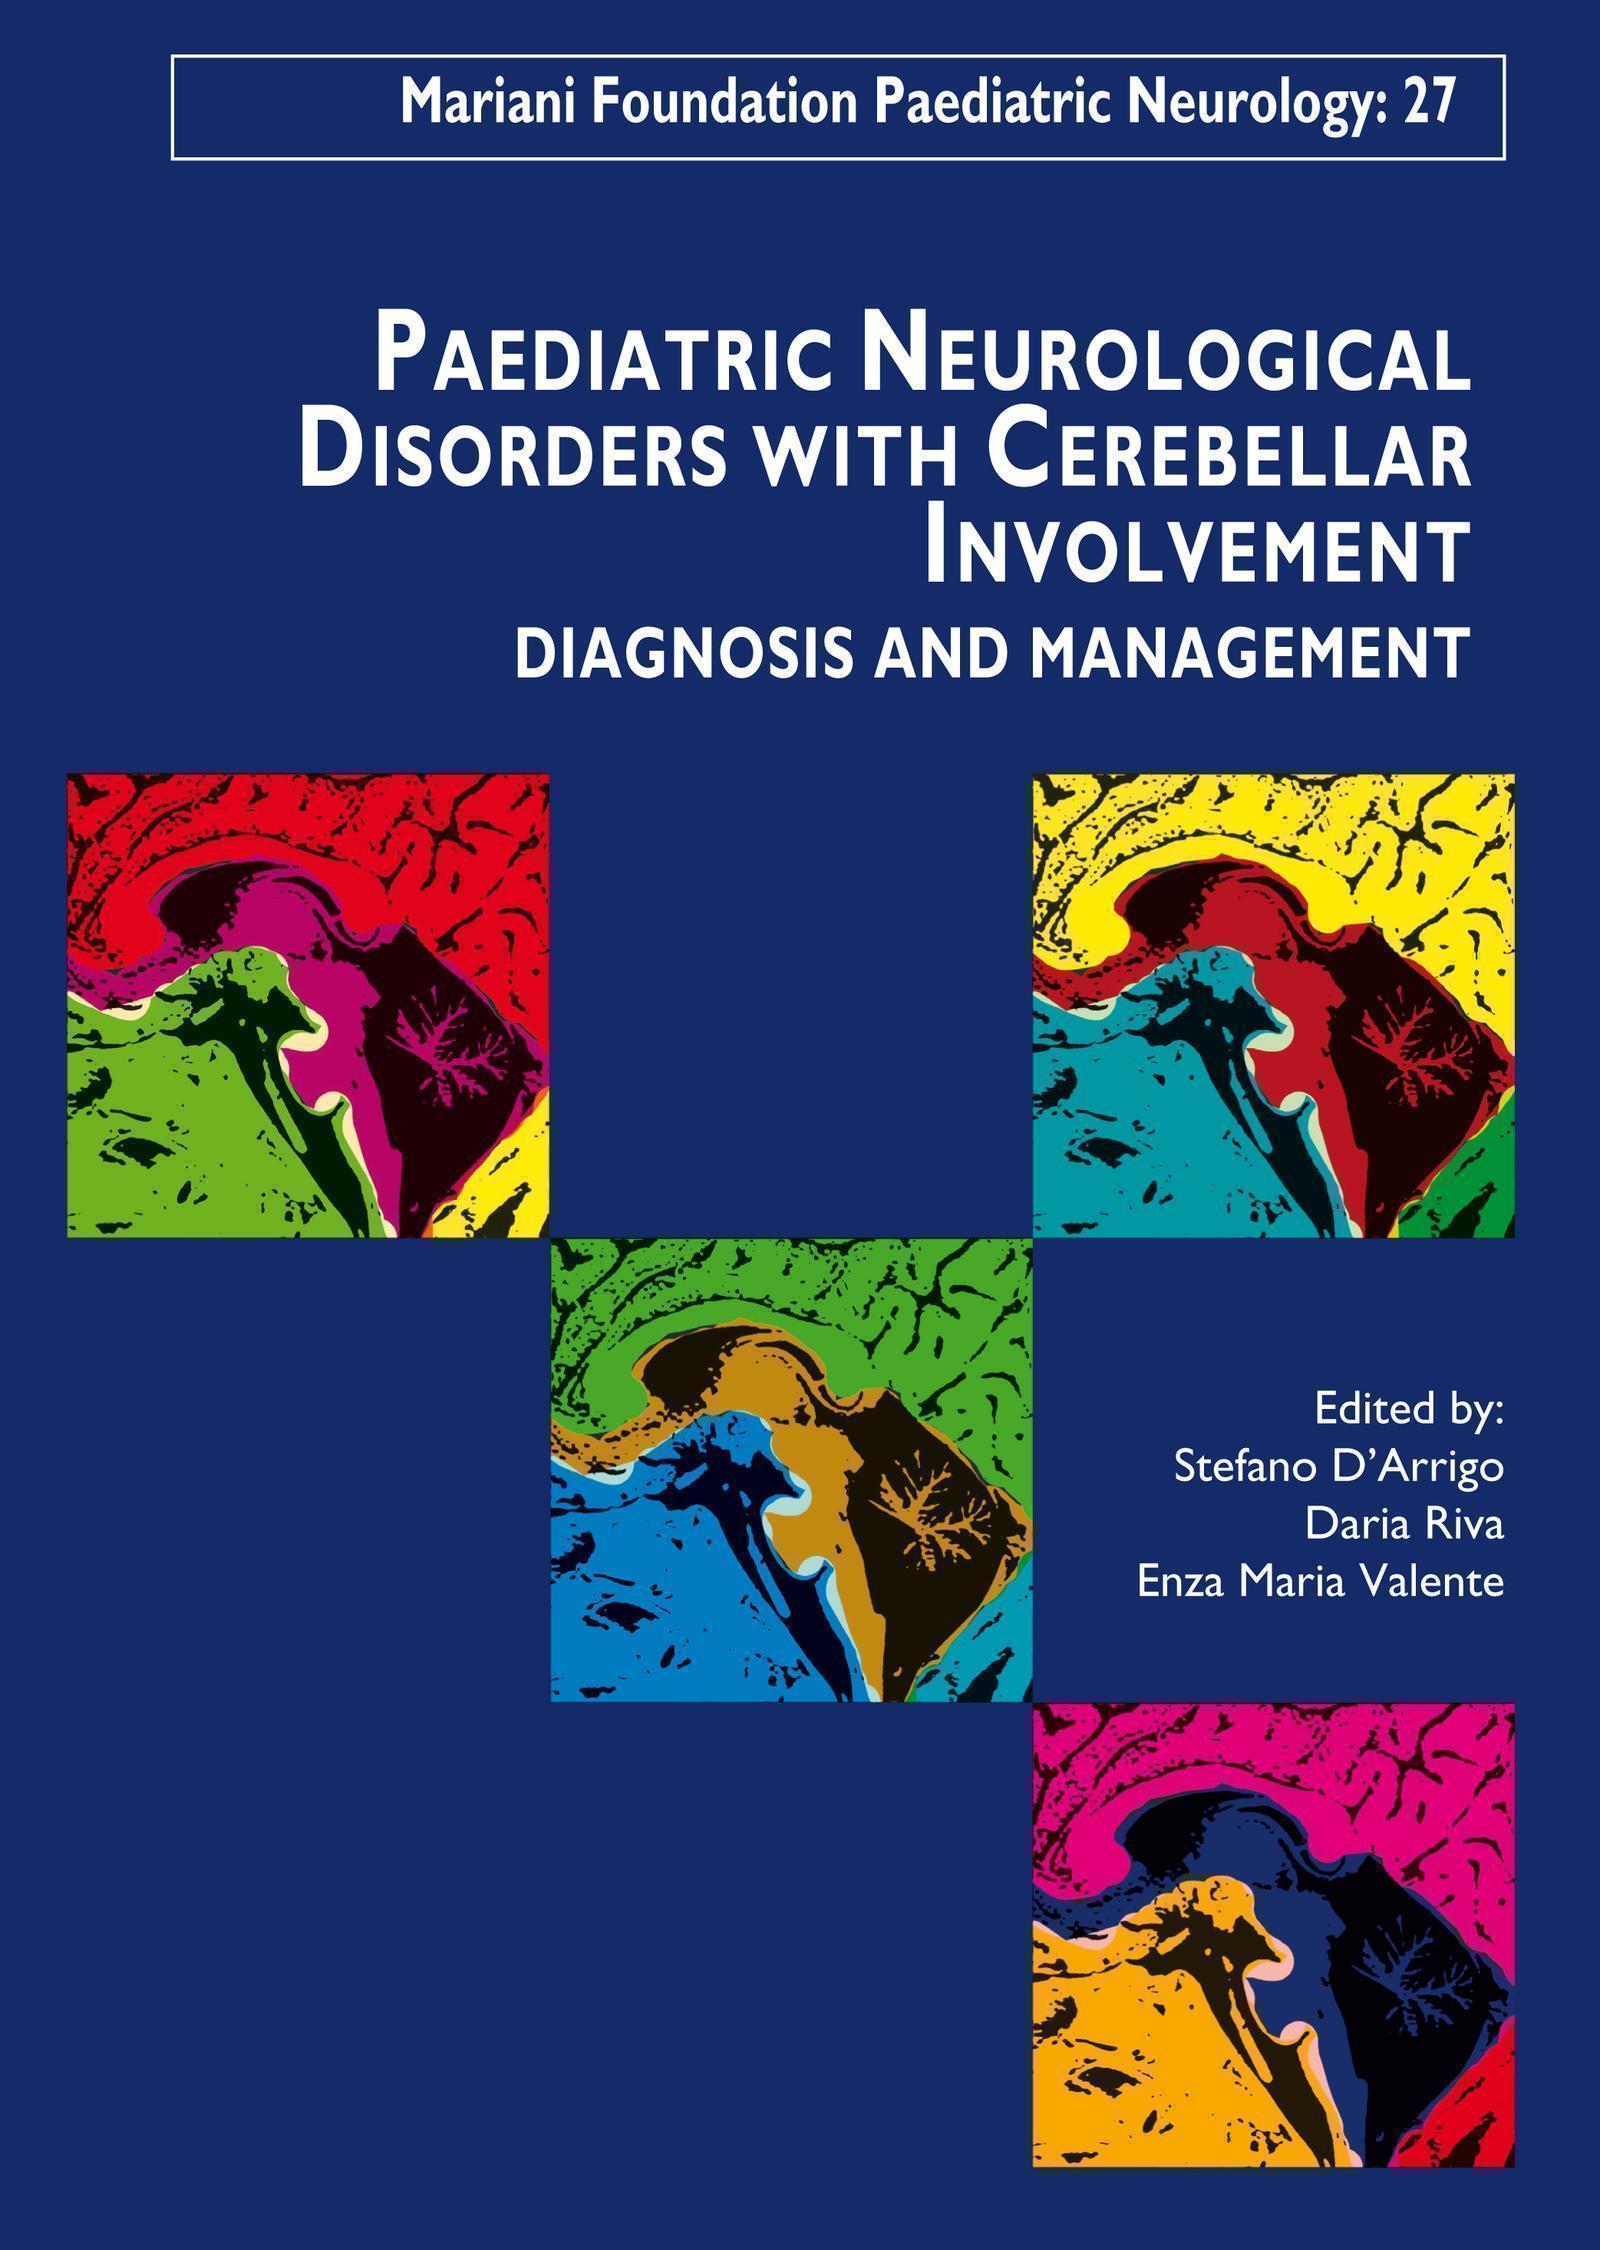 Paediatric neurological disorders with cerebellar involvement, Diagnosis and management. (9782742008353-front-cover)